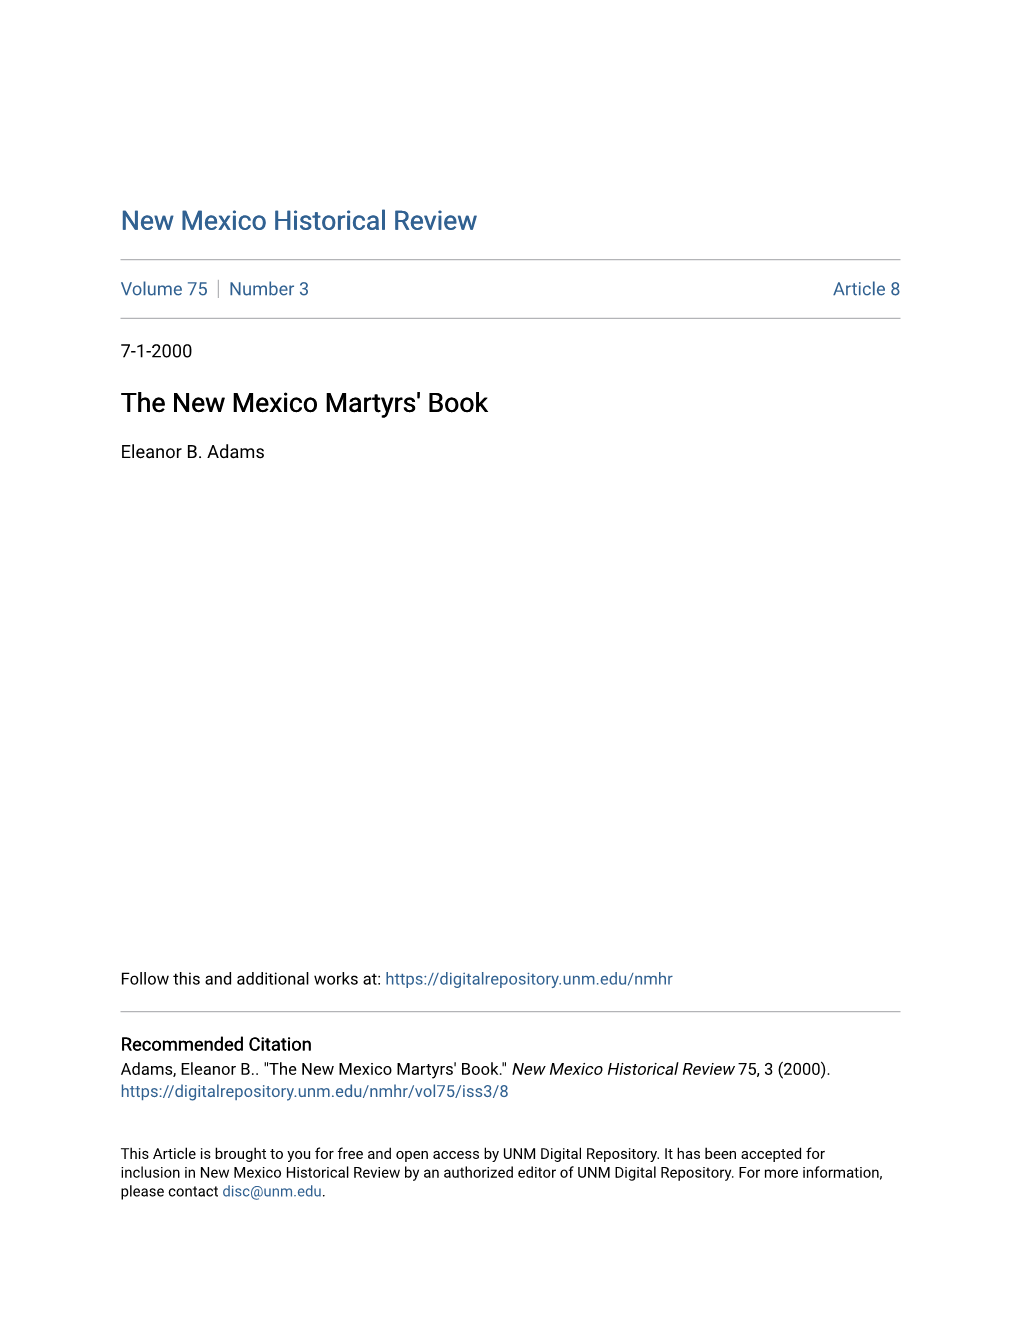 The New Mexico Martyrs' Book